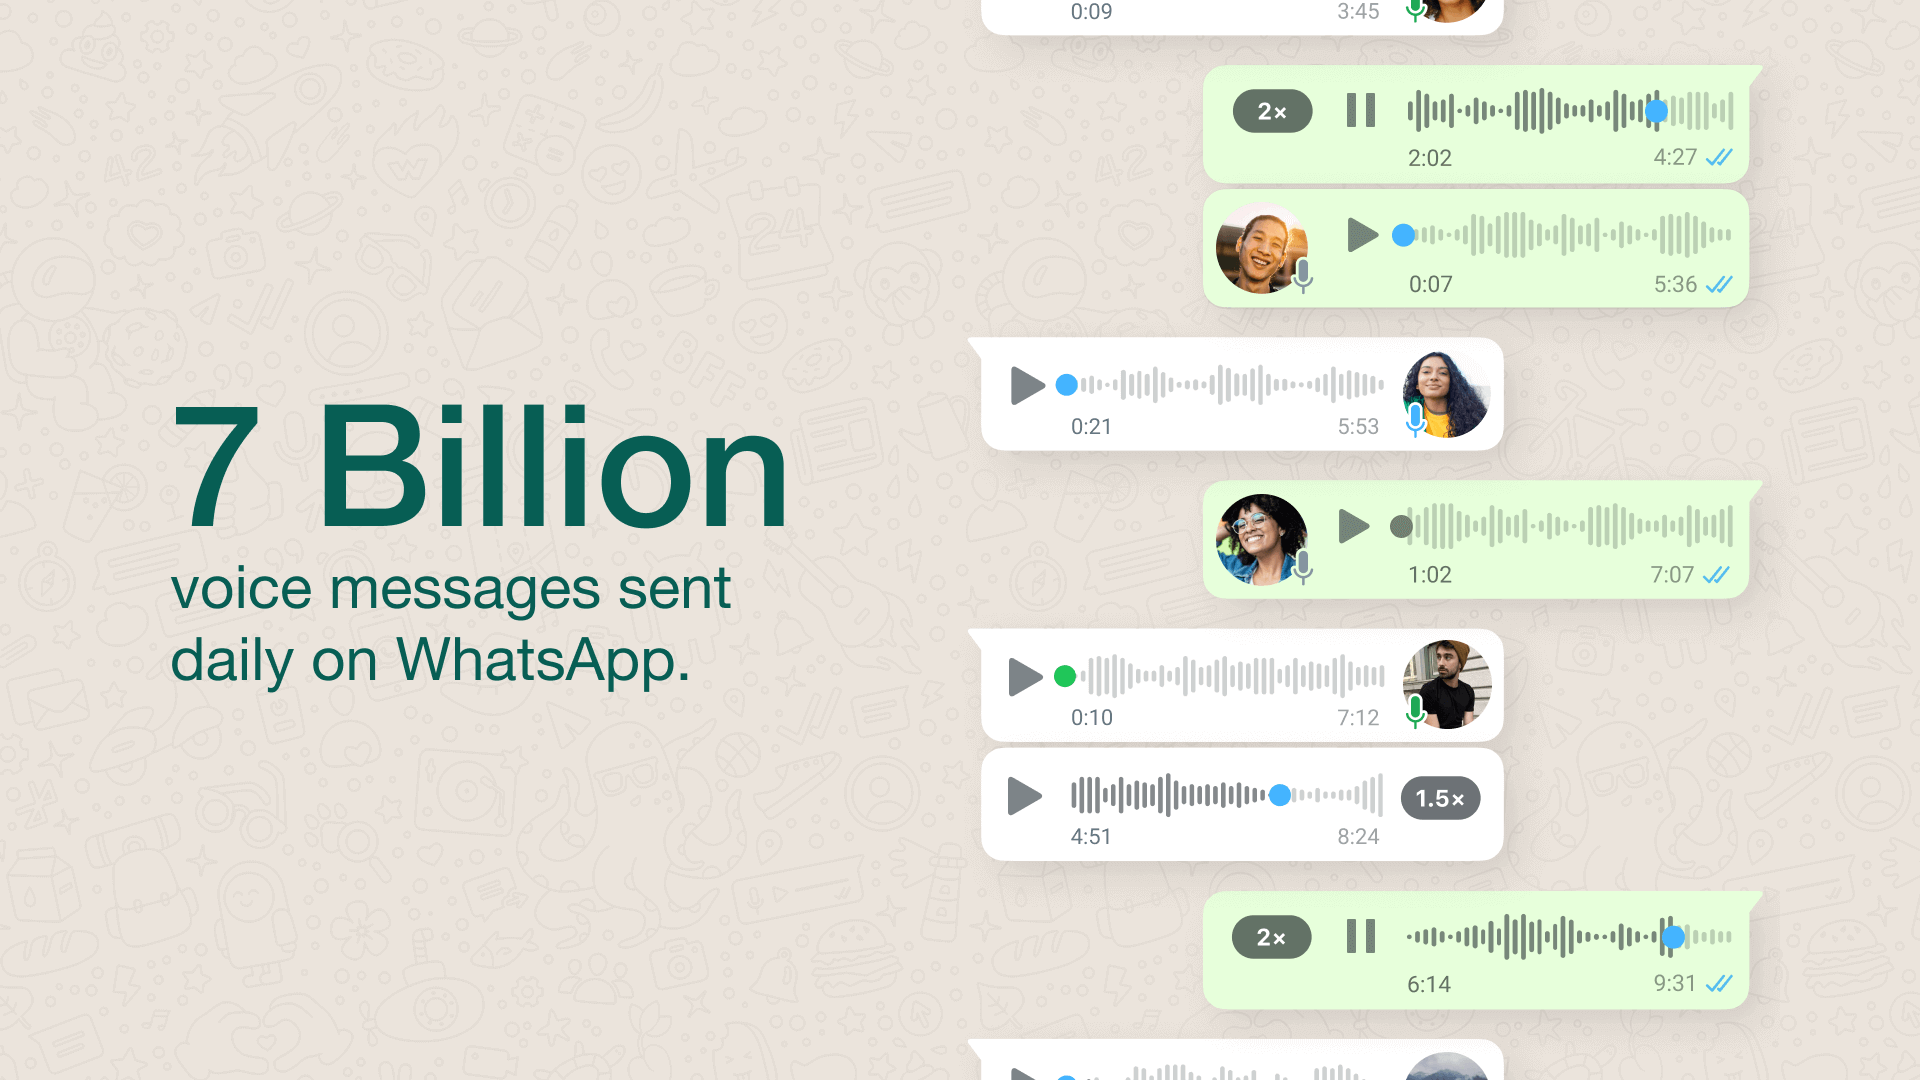 Voice Message 101: WhatsApp shares etiquette guide for becoming a voice message pro